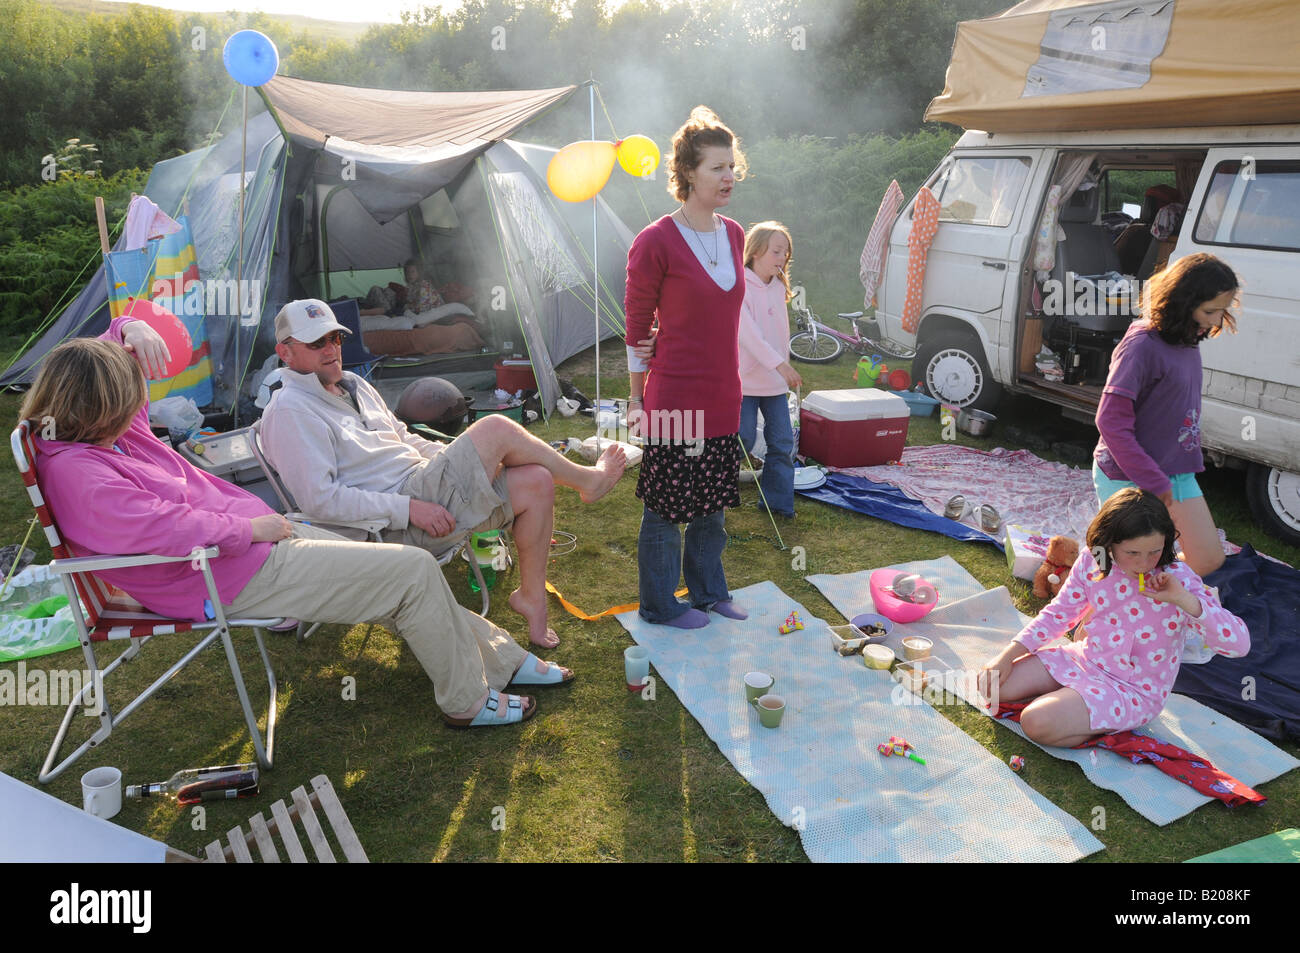 People relaxing on a messy campsite Stock Photo